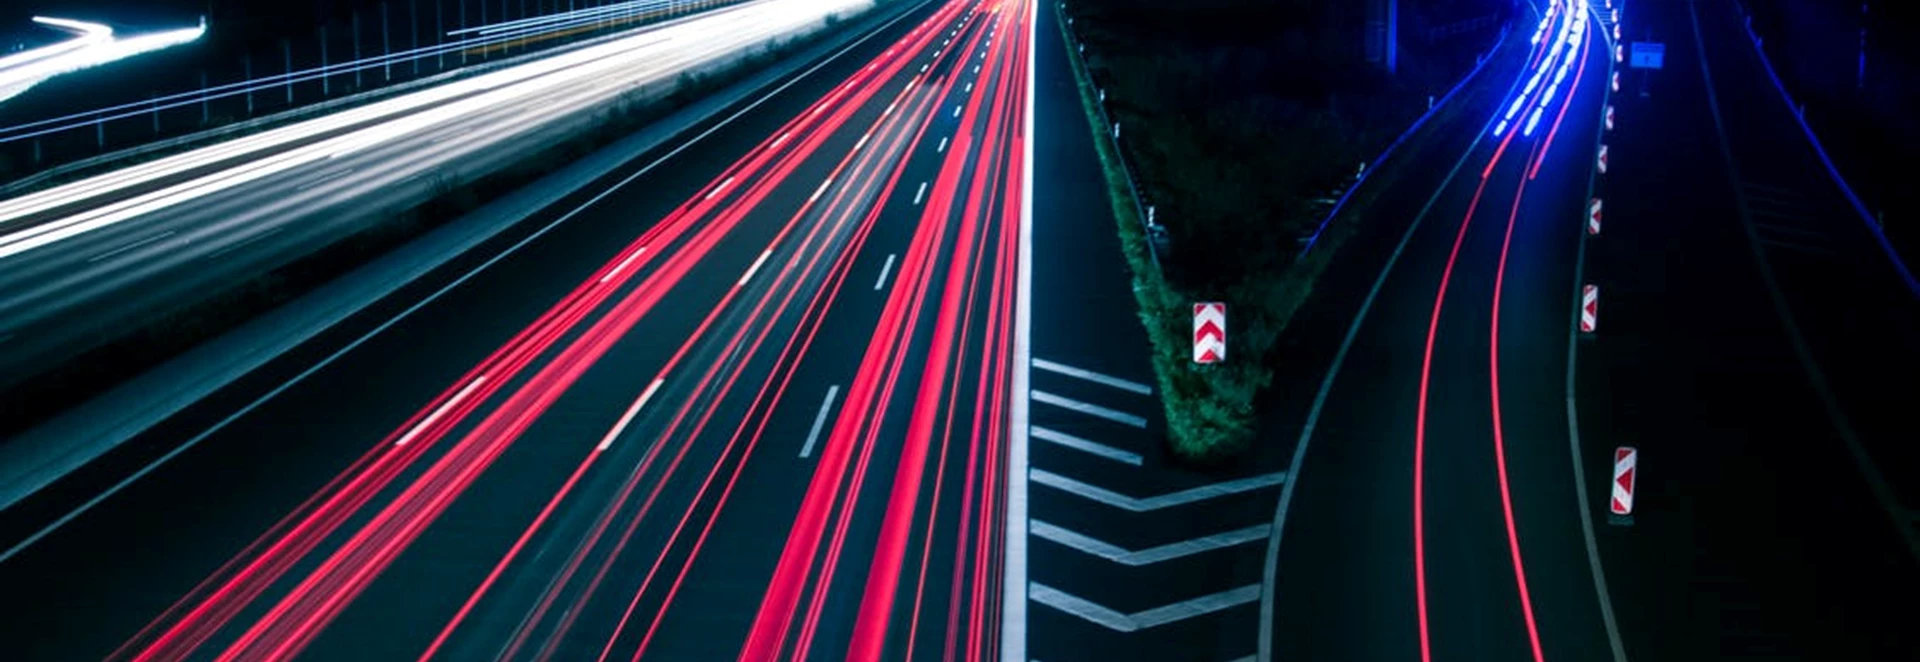 5 Smart Road Technologies for the Roads of the Future 